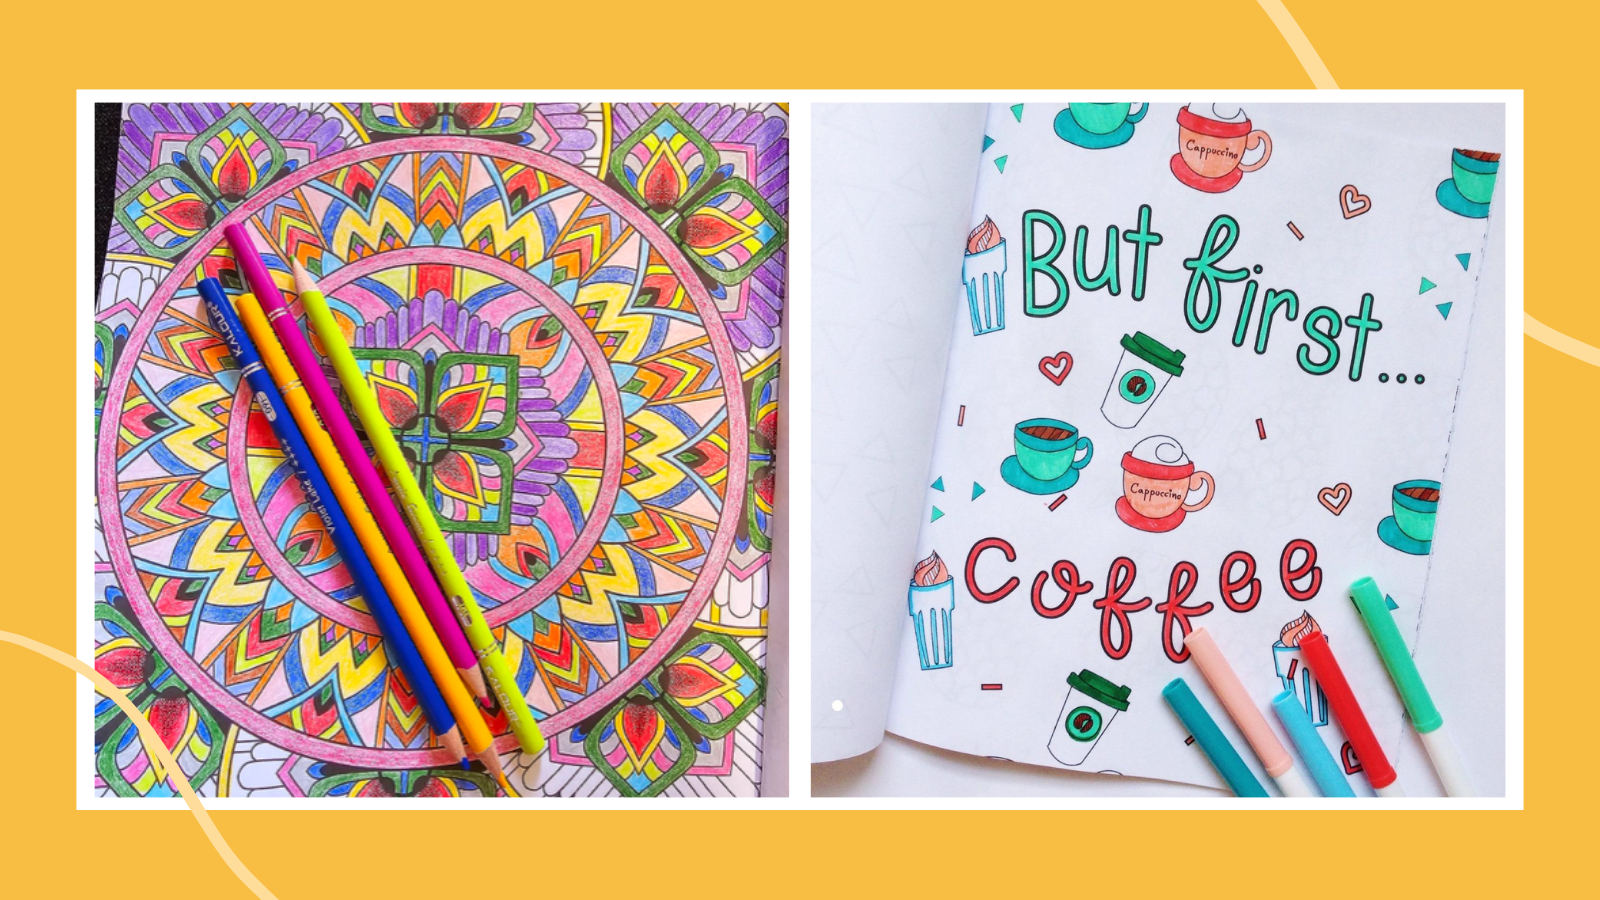 Are Adult Coloring Books Actually Helpful?